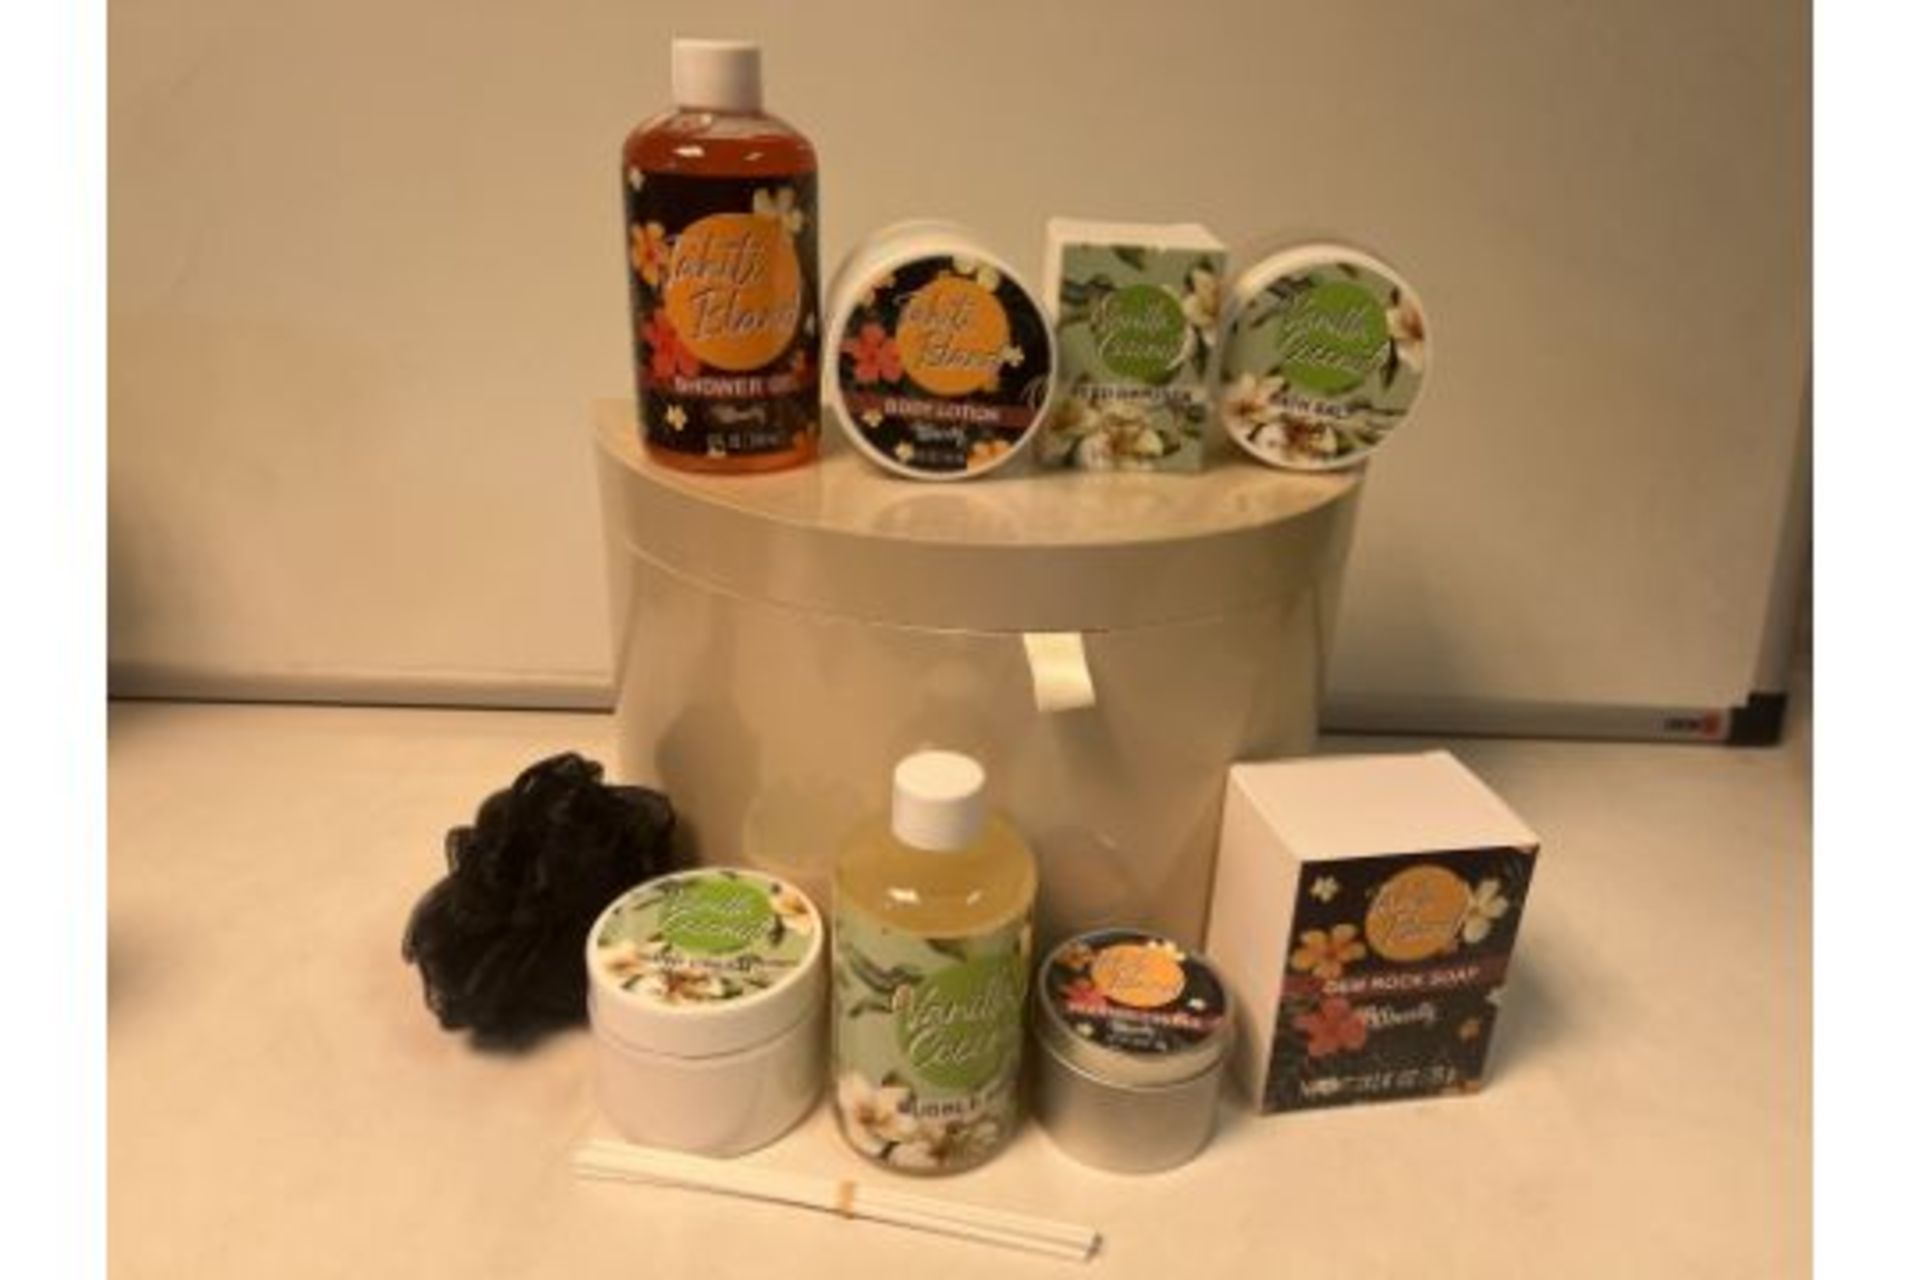 8 X BRAND NEW BATH AND BODY SETS INCLUDING SHOWER GEL, BUBBLE BATH, BODY LOTION, HAND CREAM, REED